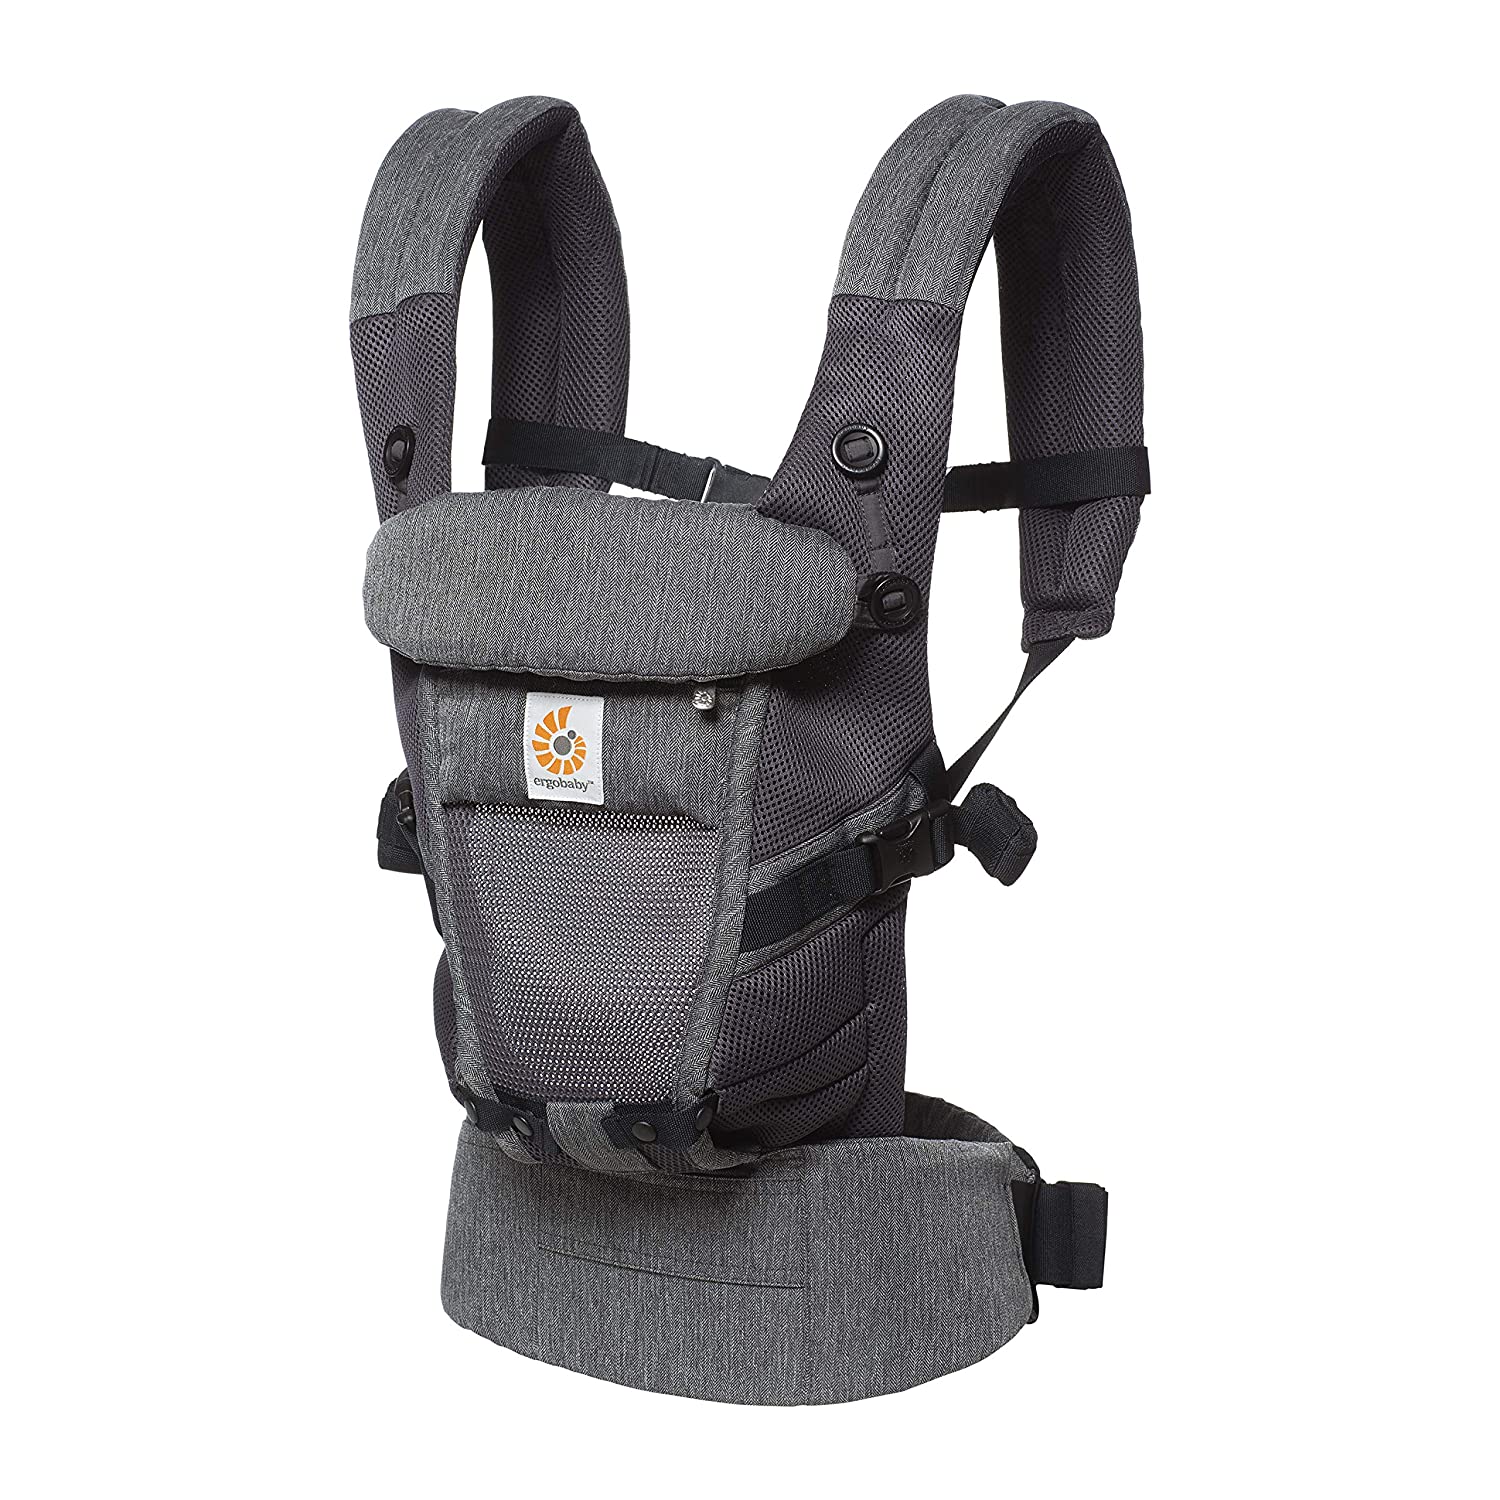 Ergobaby Baby Carrier For Newborns, Adapt Cool Air Mesh Baby Carrier Child 